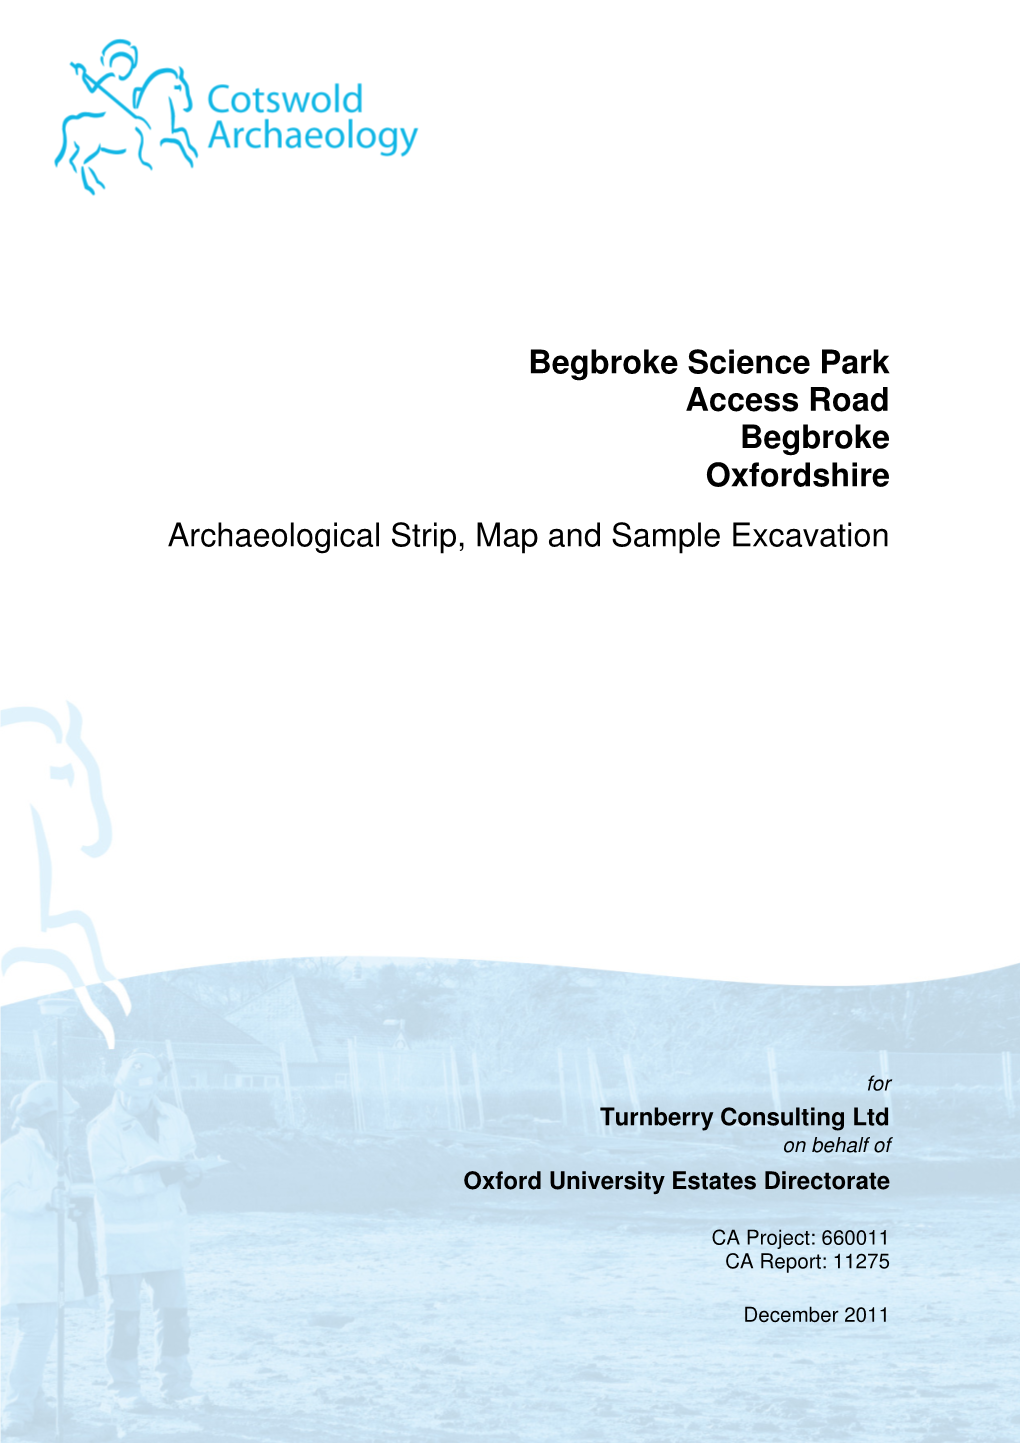 Begbroke Science Park Access Road Begbroke Oxfordshire Archaeological Strip, Map and Sample Excavation